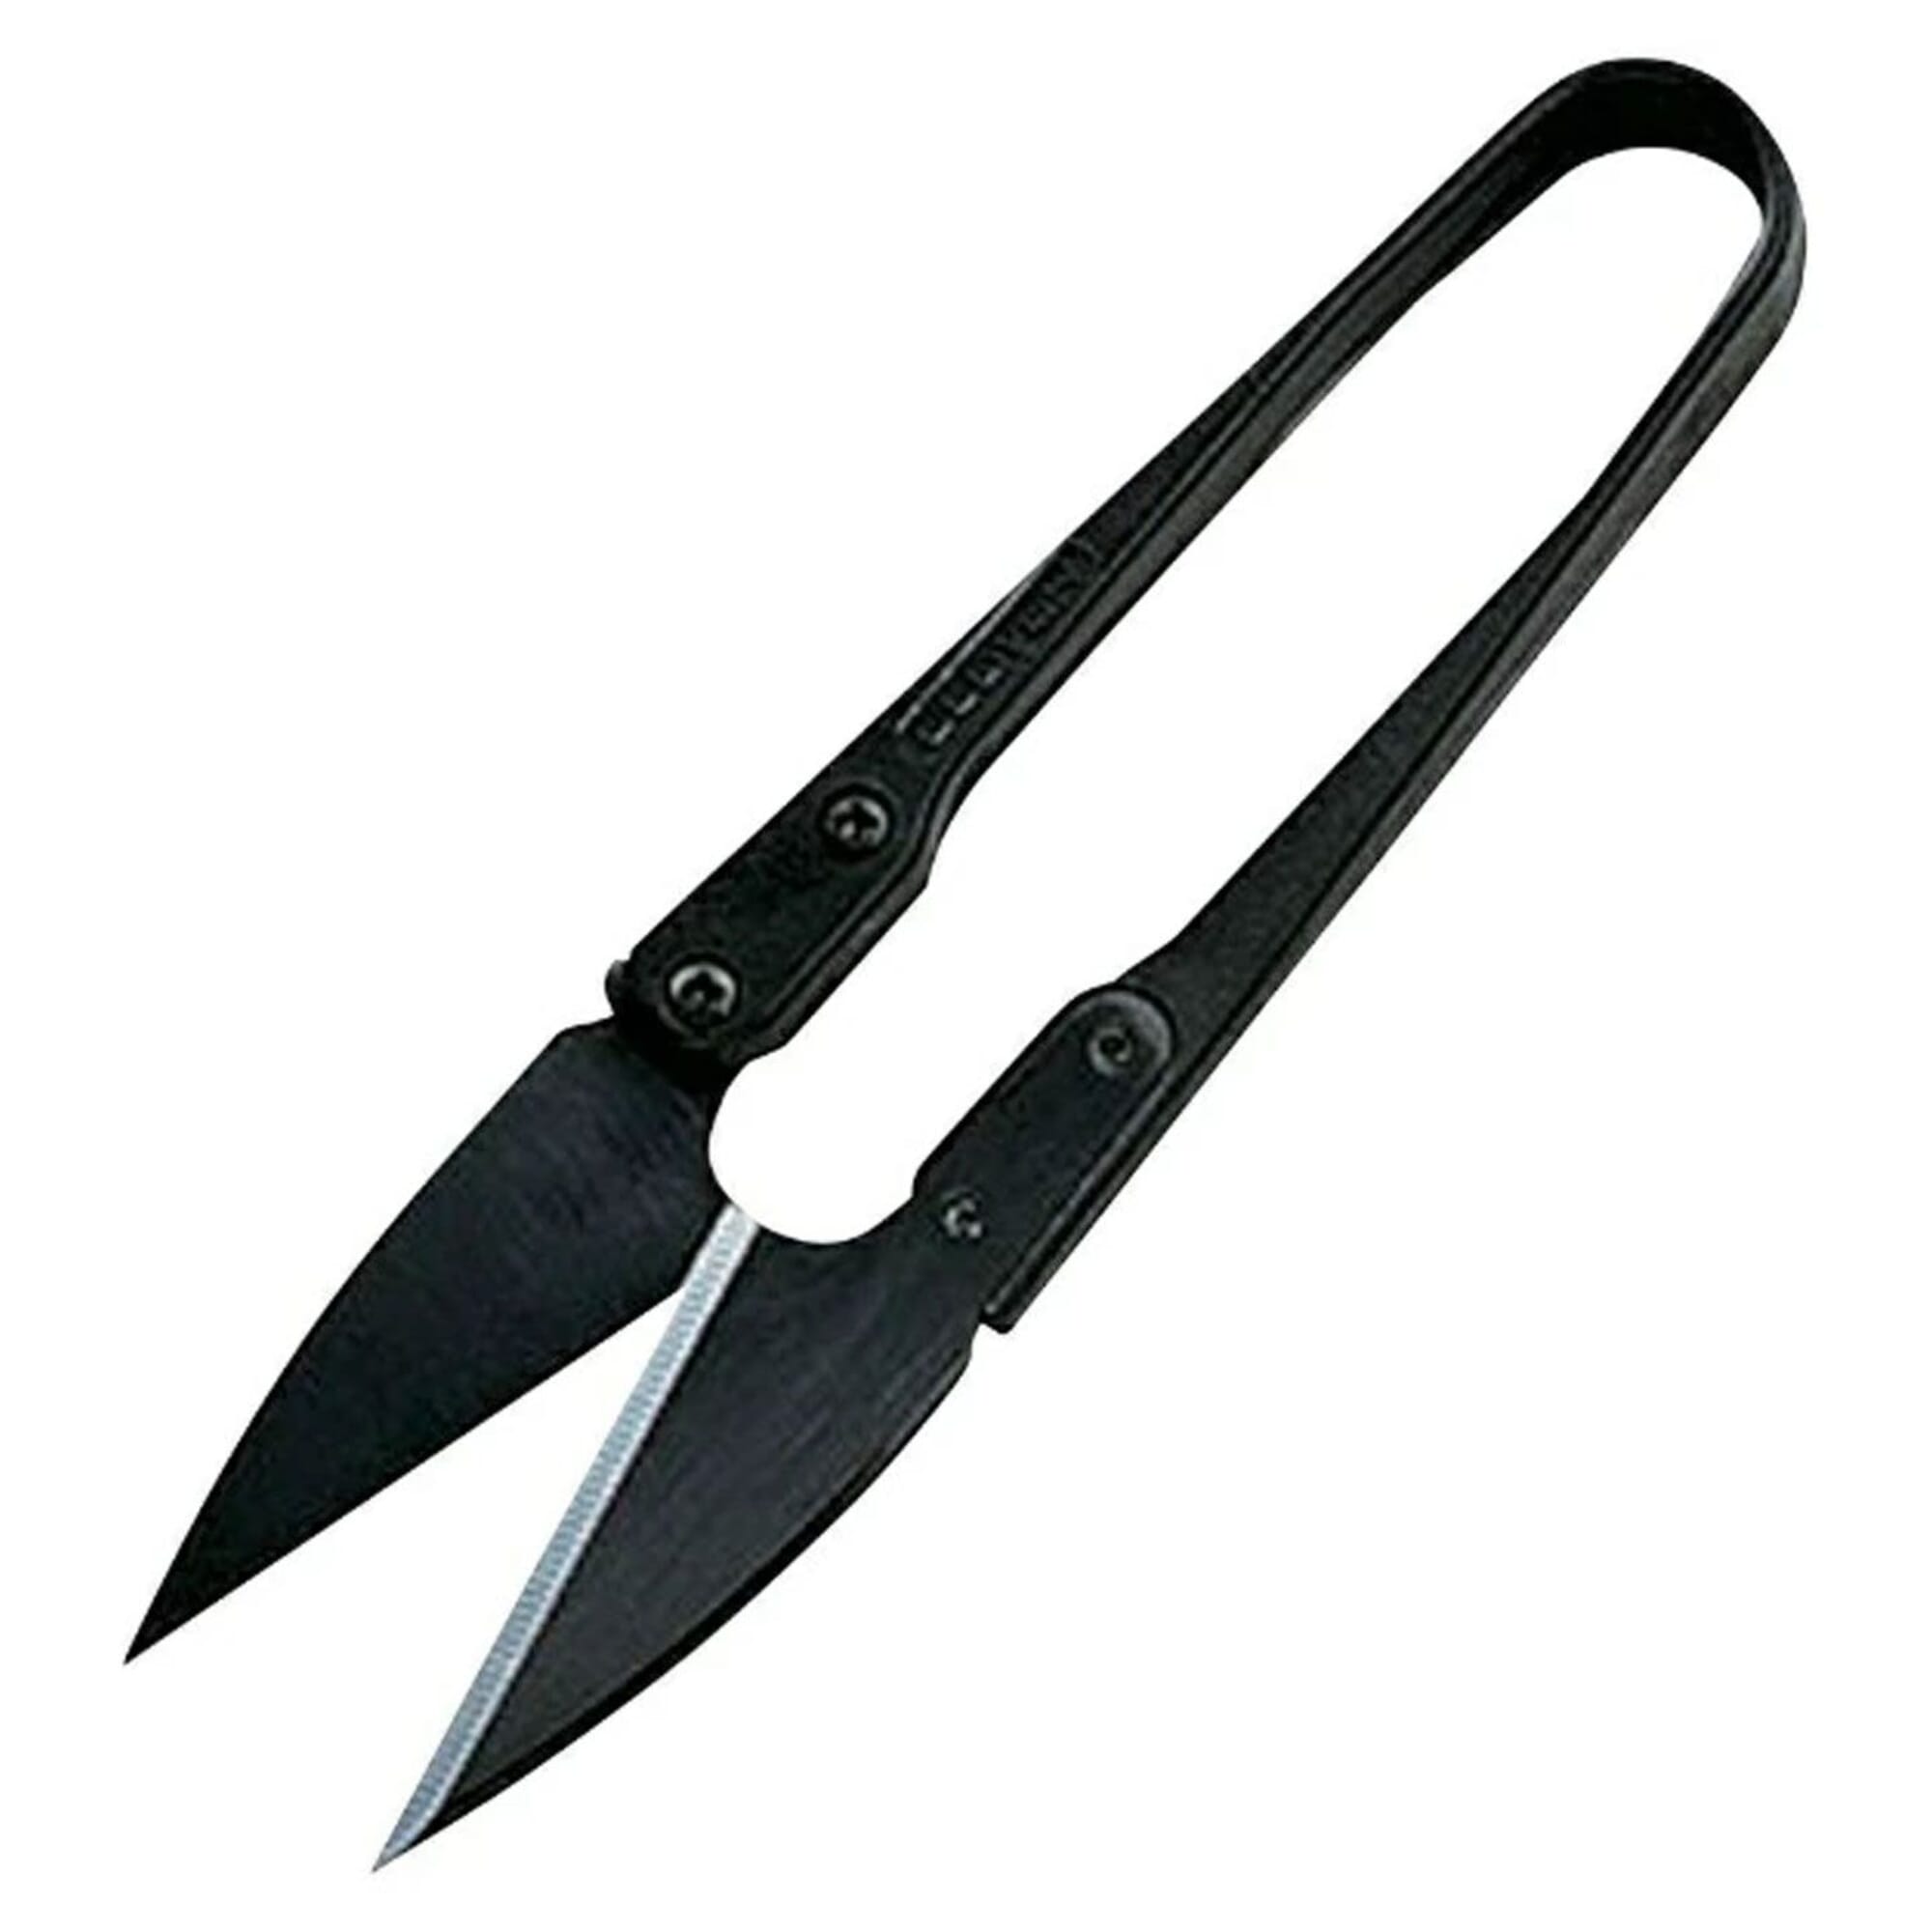 Black Embroidery Snips - Thread Snips - Approx. 4 x 3/4 - Small Black Snips  - Black Snips - U Shape Sharp Snips - Black Thread Snips